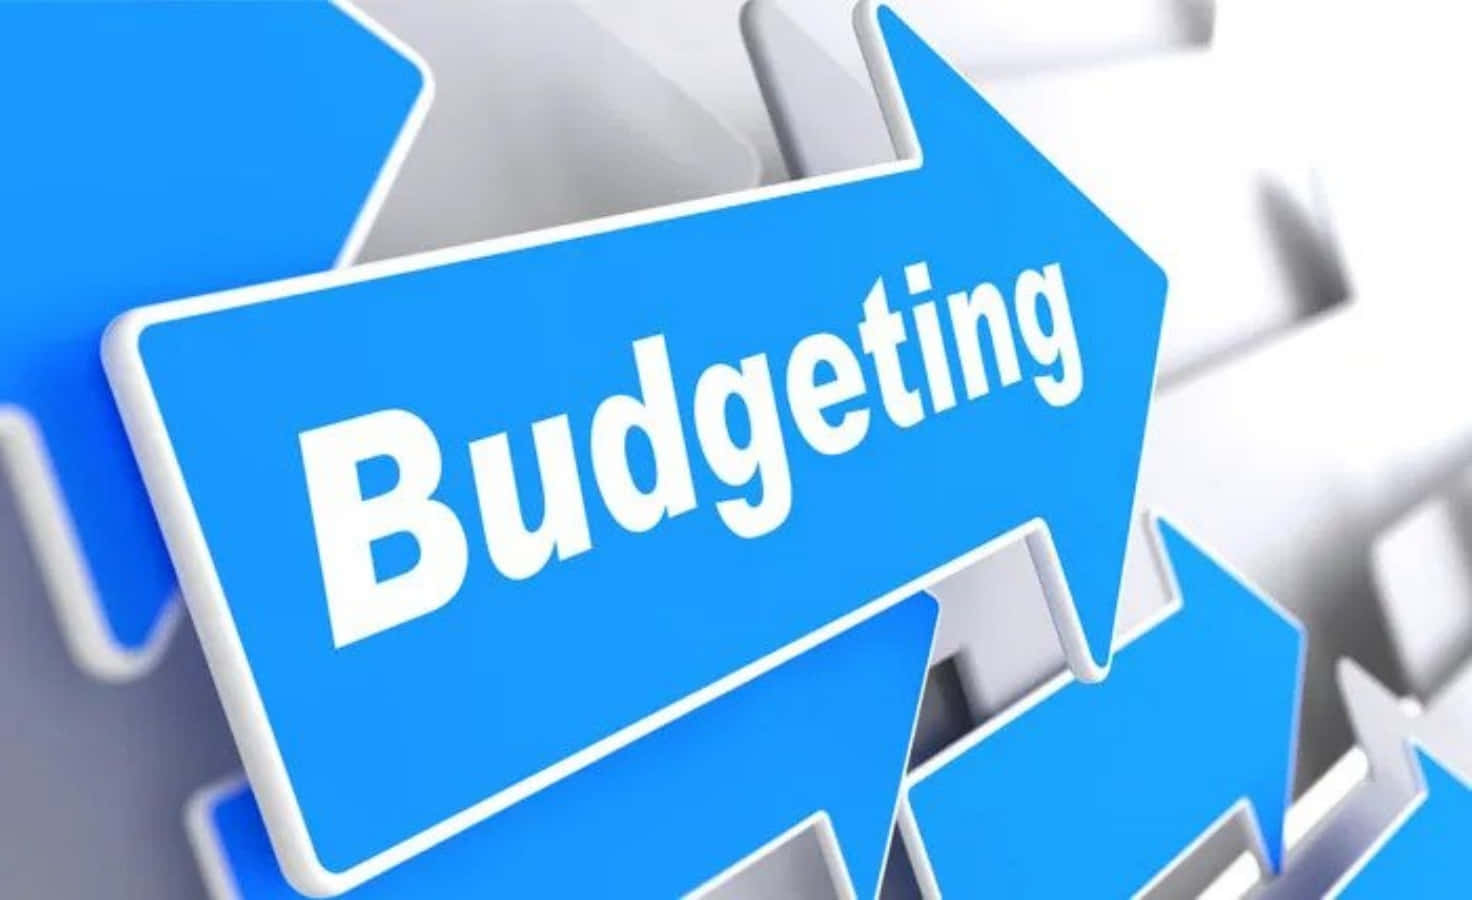 Budgeting Arrows Pointing In Different Directions